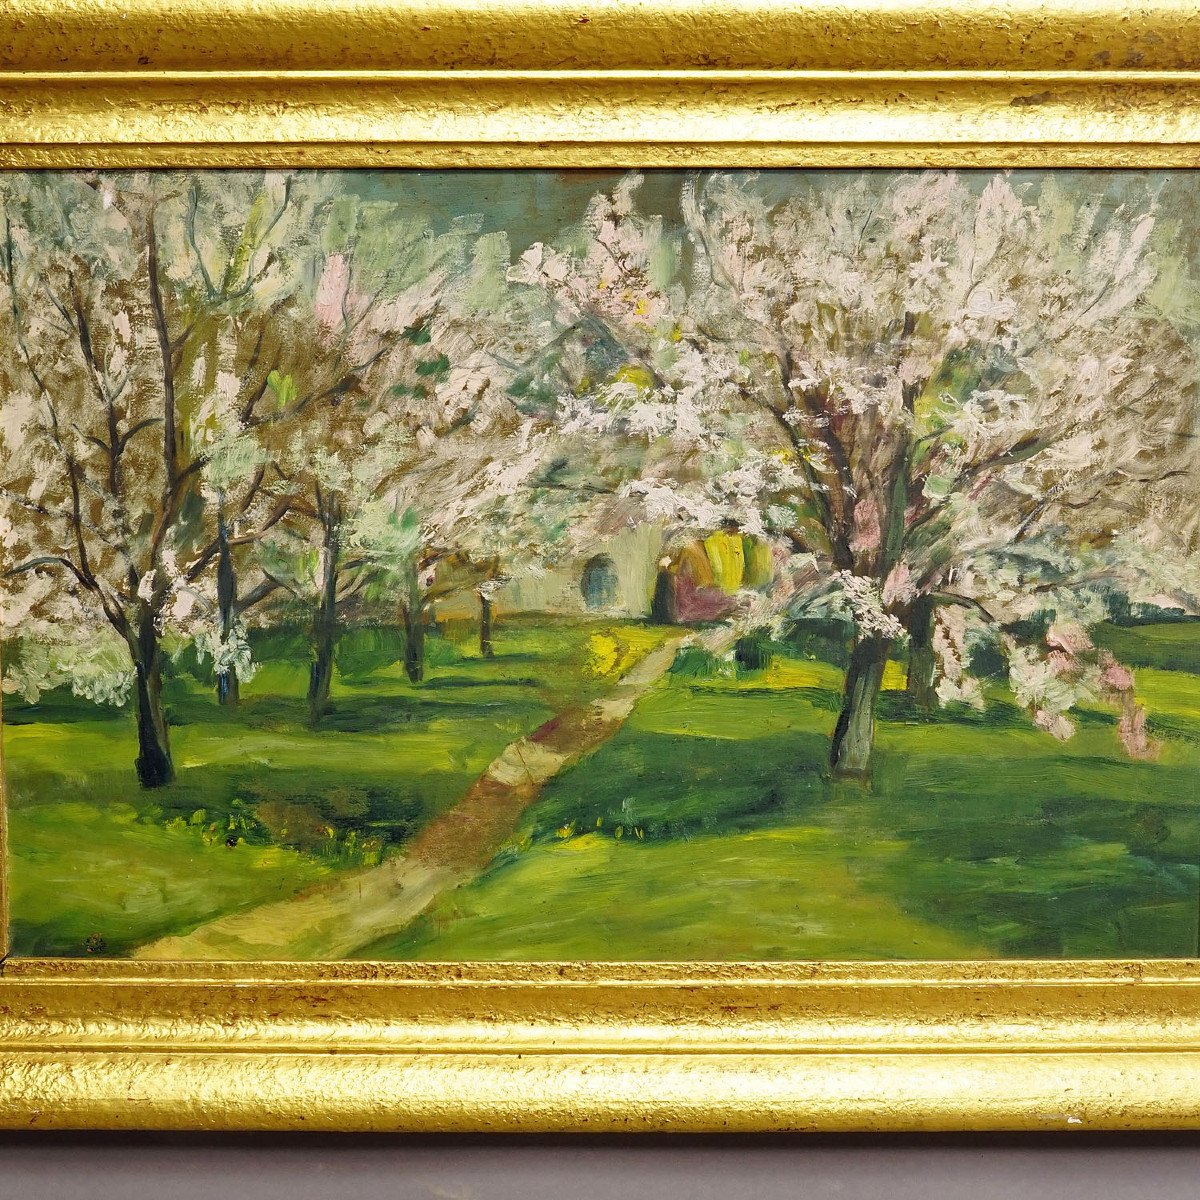 Impressionist Painting Of A Garden With Apple Trees In Bloom-photo-3